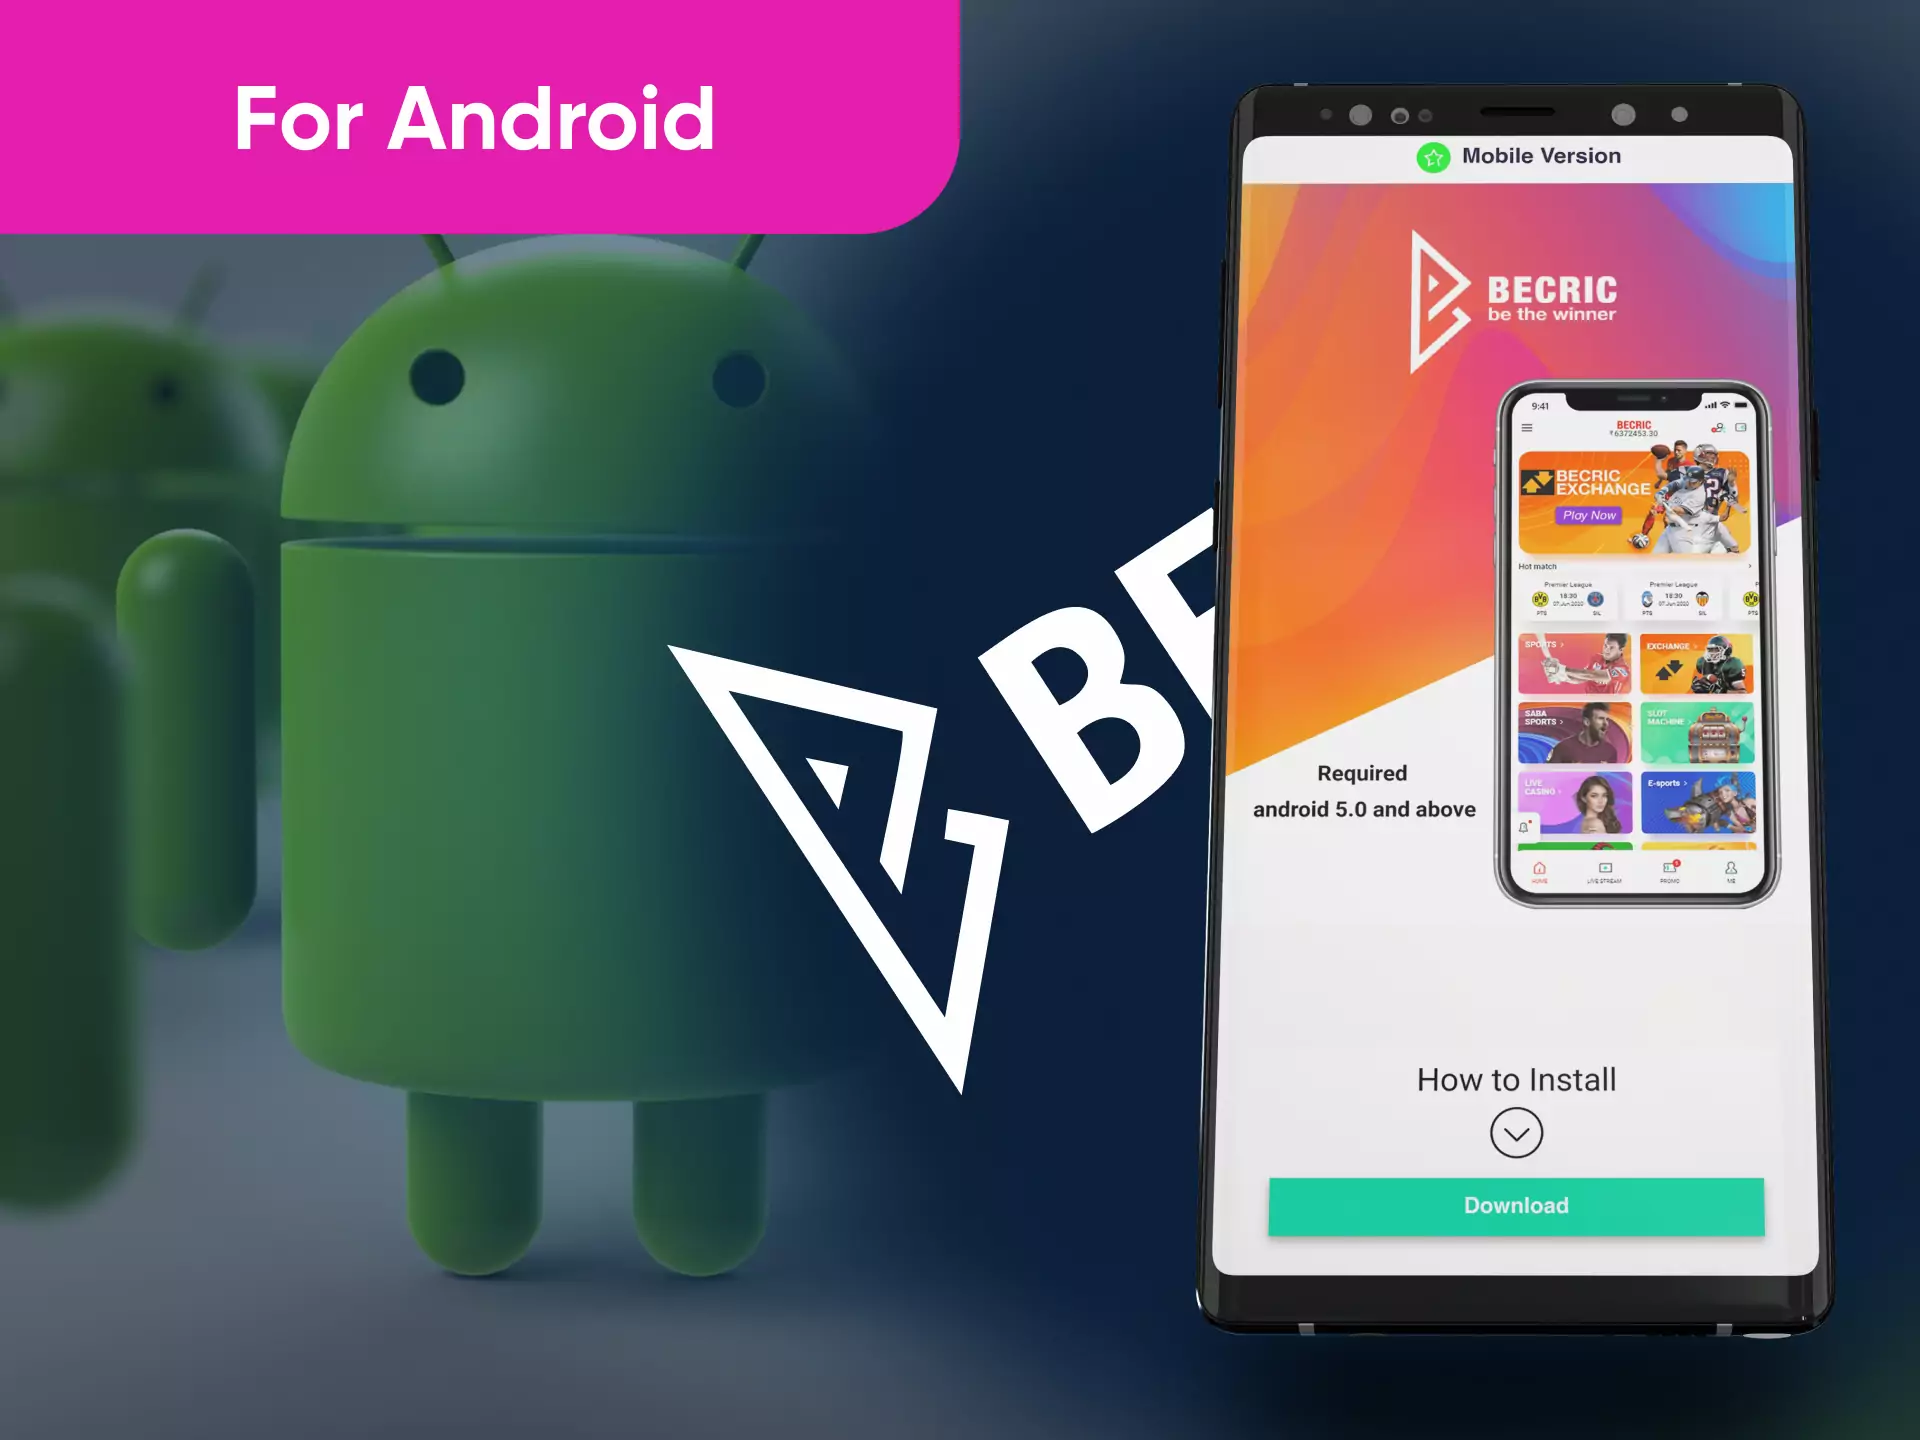 To use Becric from a mobile device, you can install the app for Android.